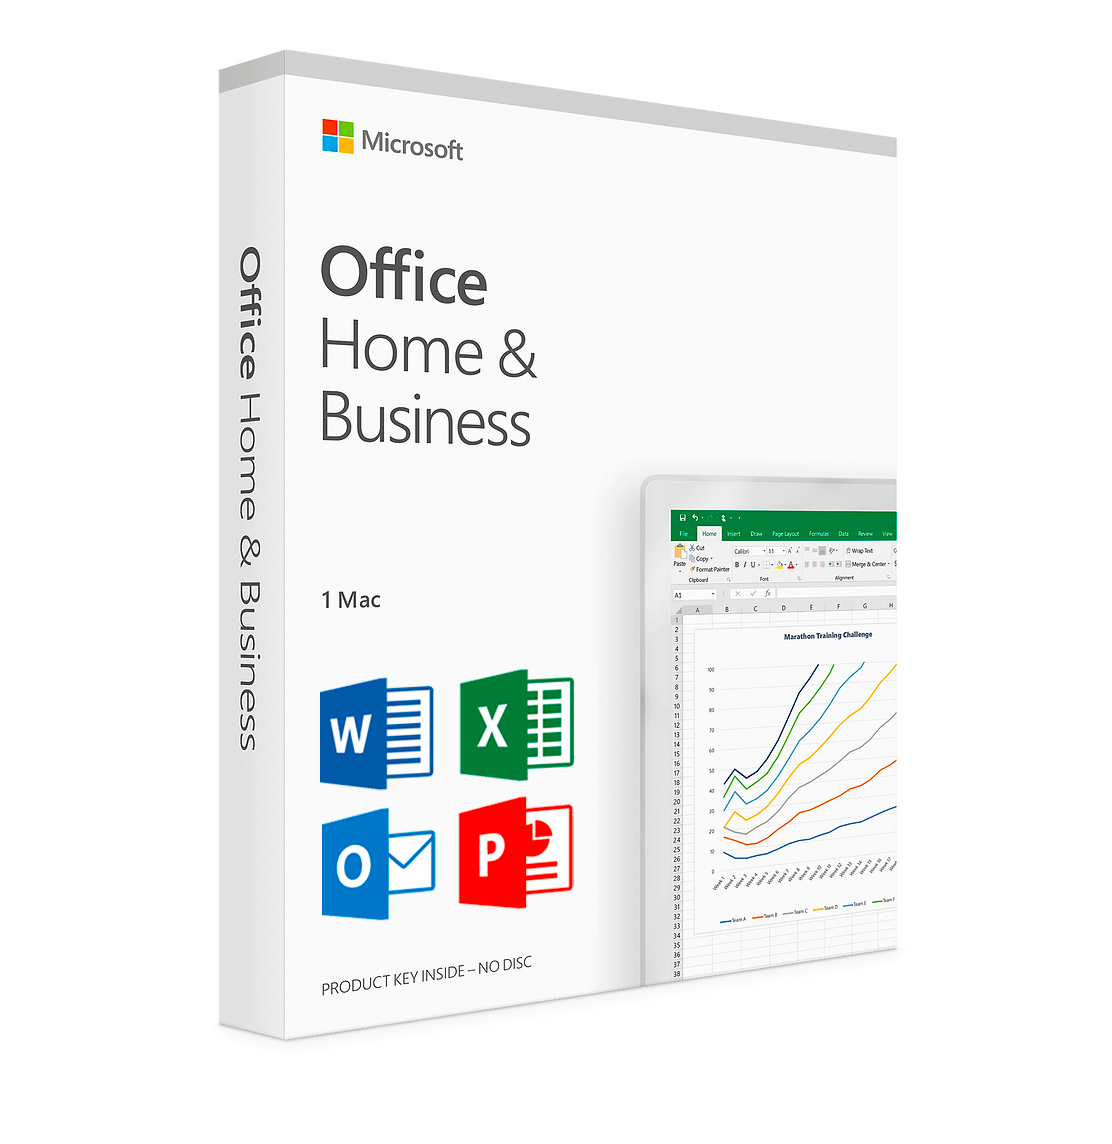 Microsoft Office 2019 Home and Business. Office 2021 Pro Plus. Microsoft Office 2019 Home and Business, Box. Office 2021 Home and Business.